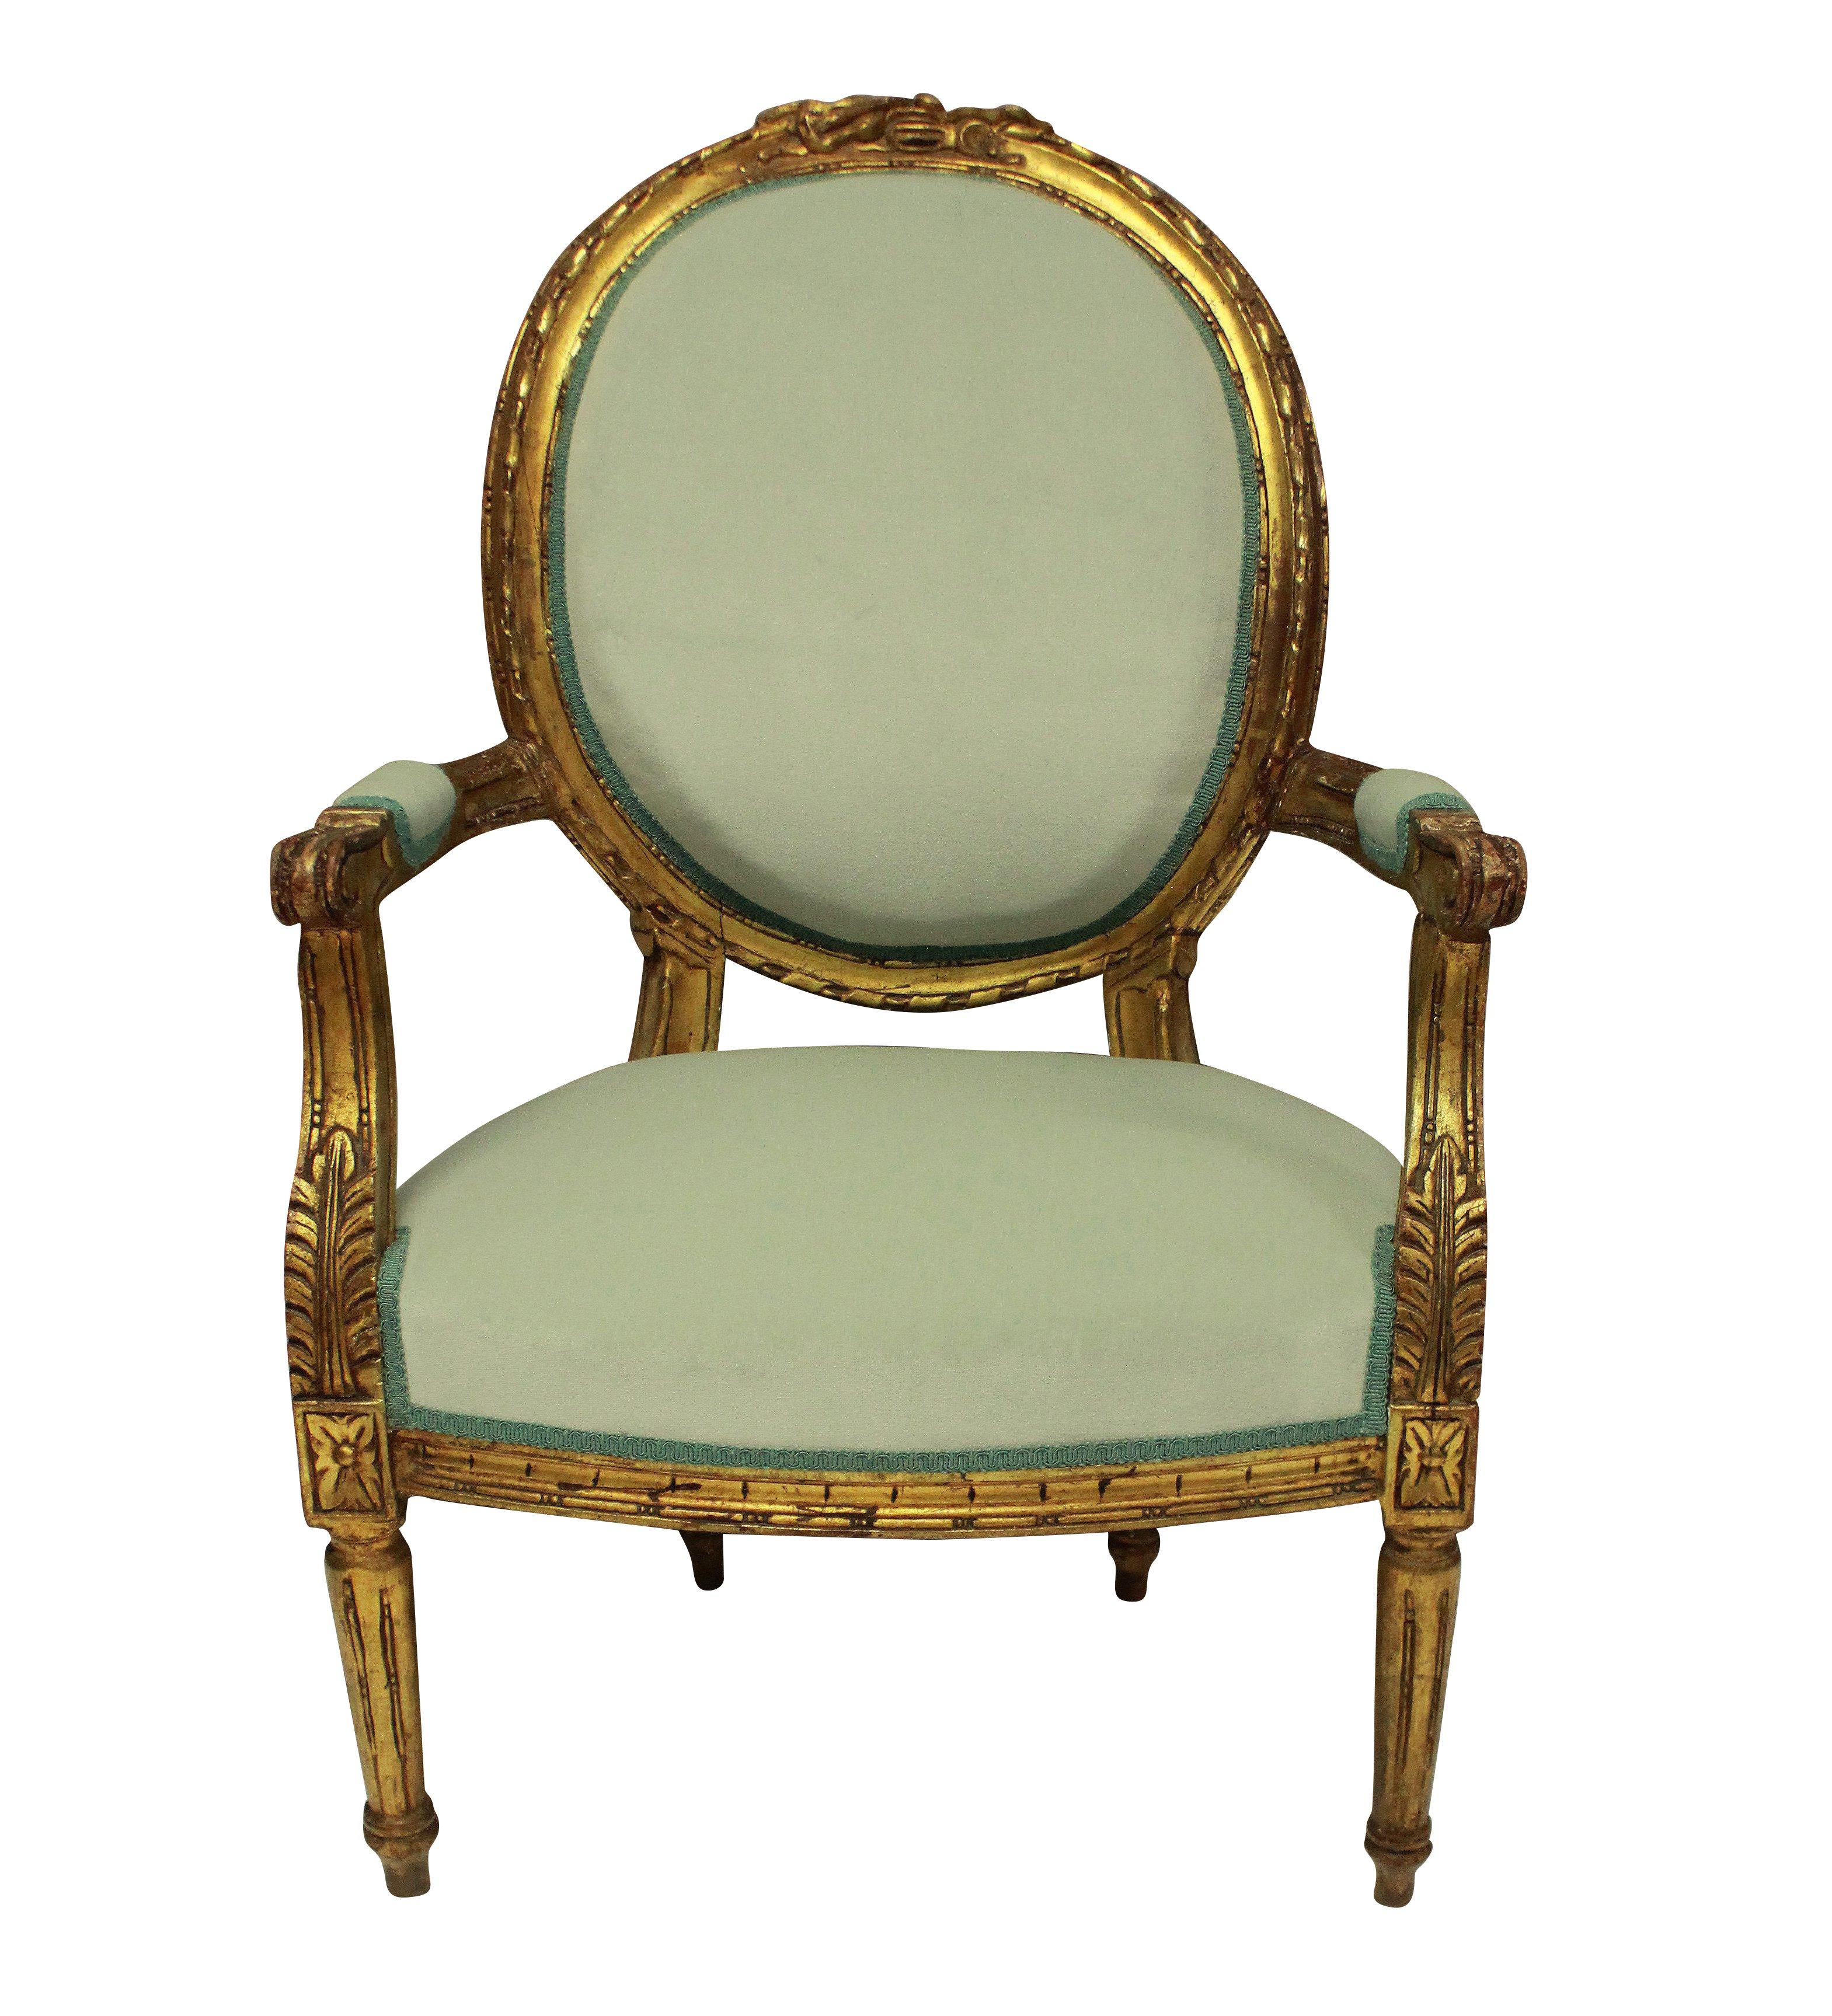 A pair of 19th century Louis XVI style giltwood armchairs, newly upholstered in duck egg velvet.